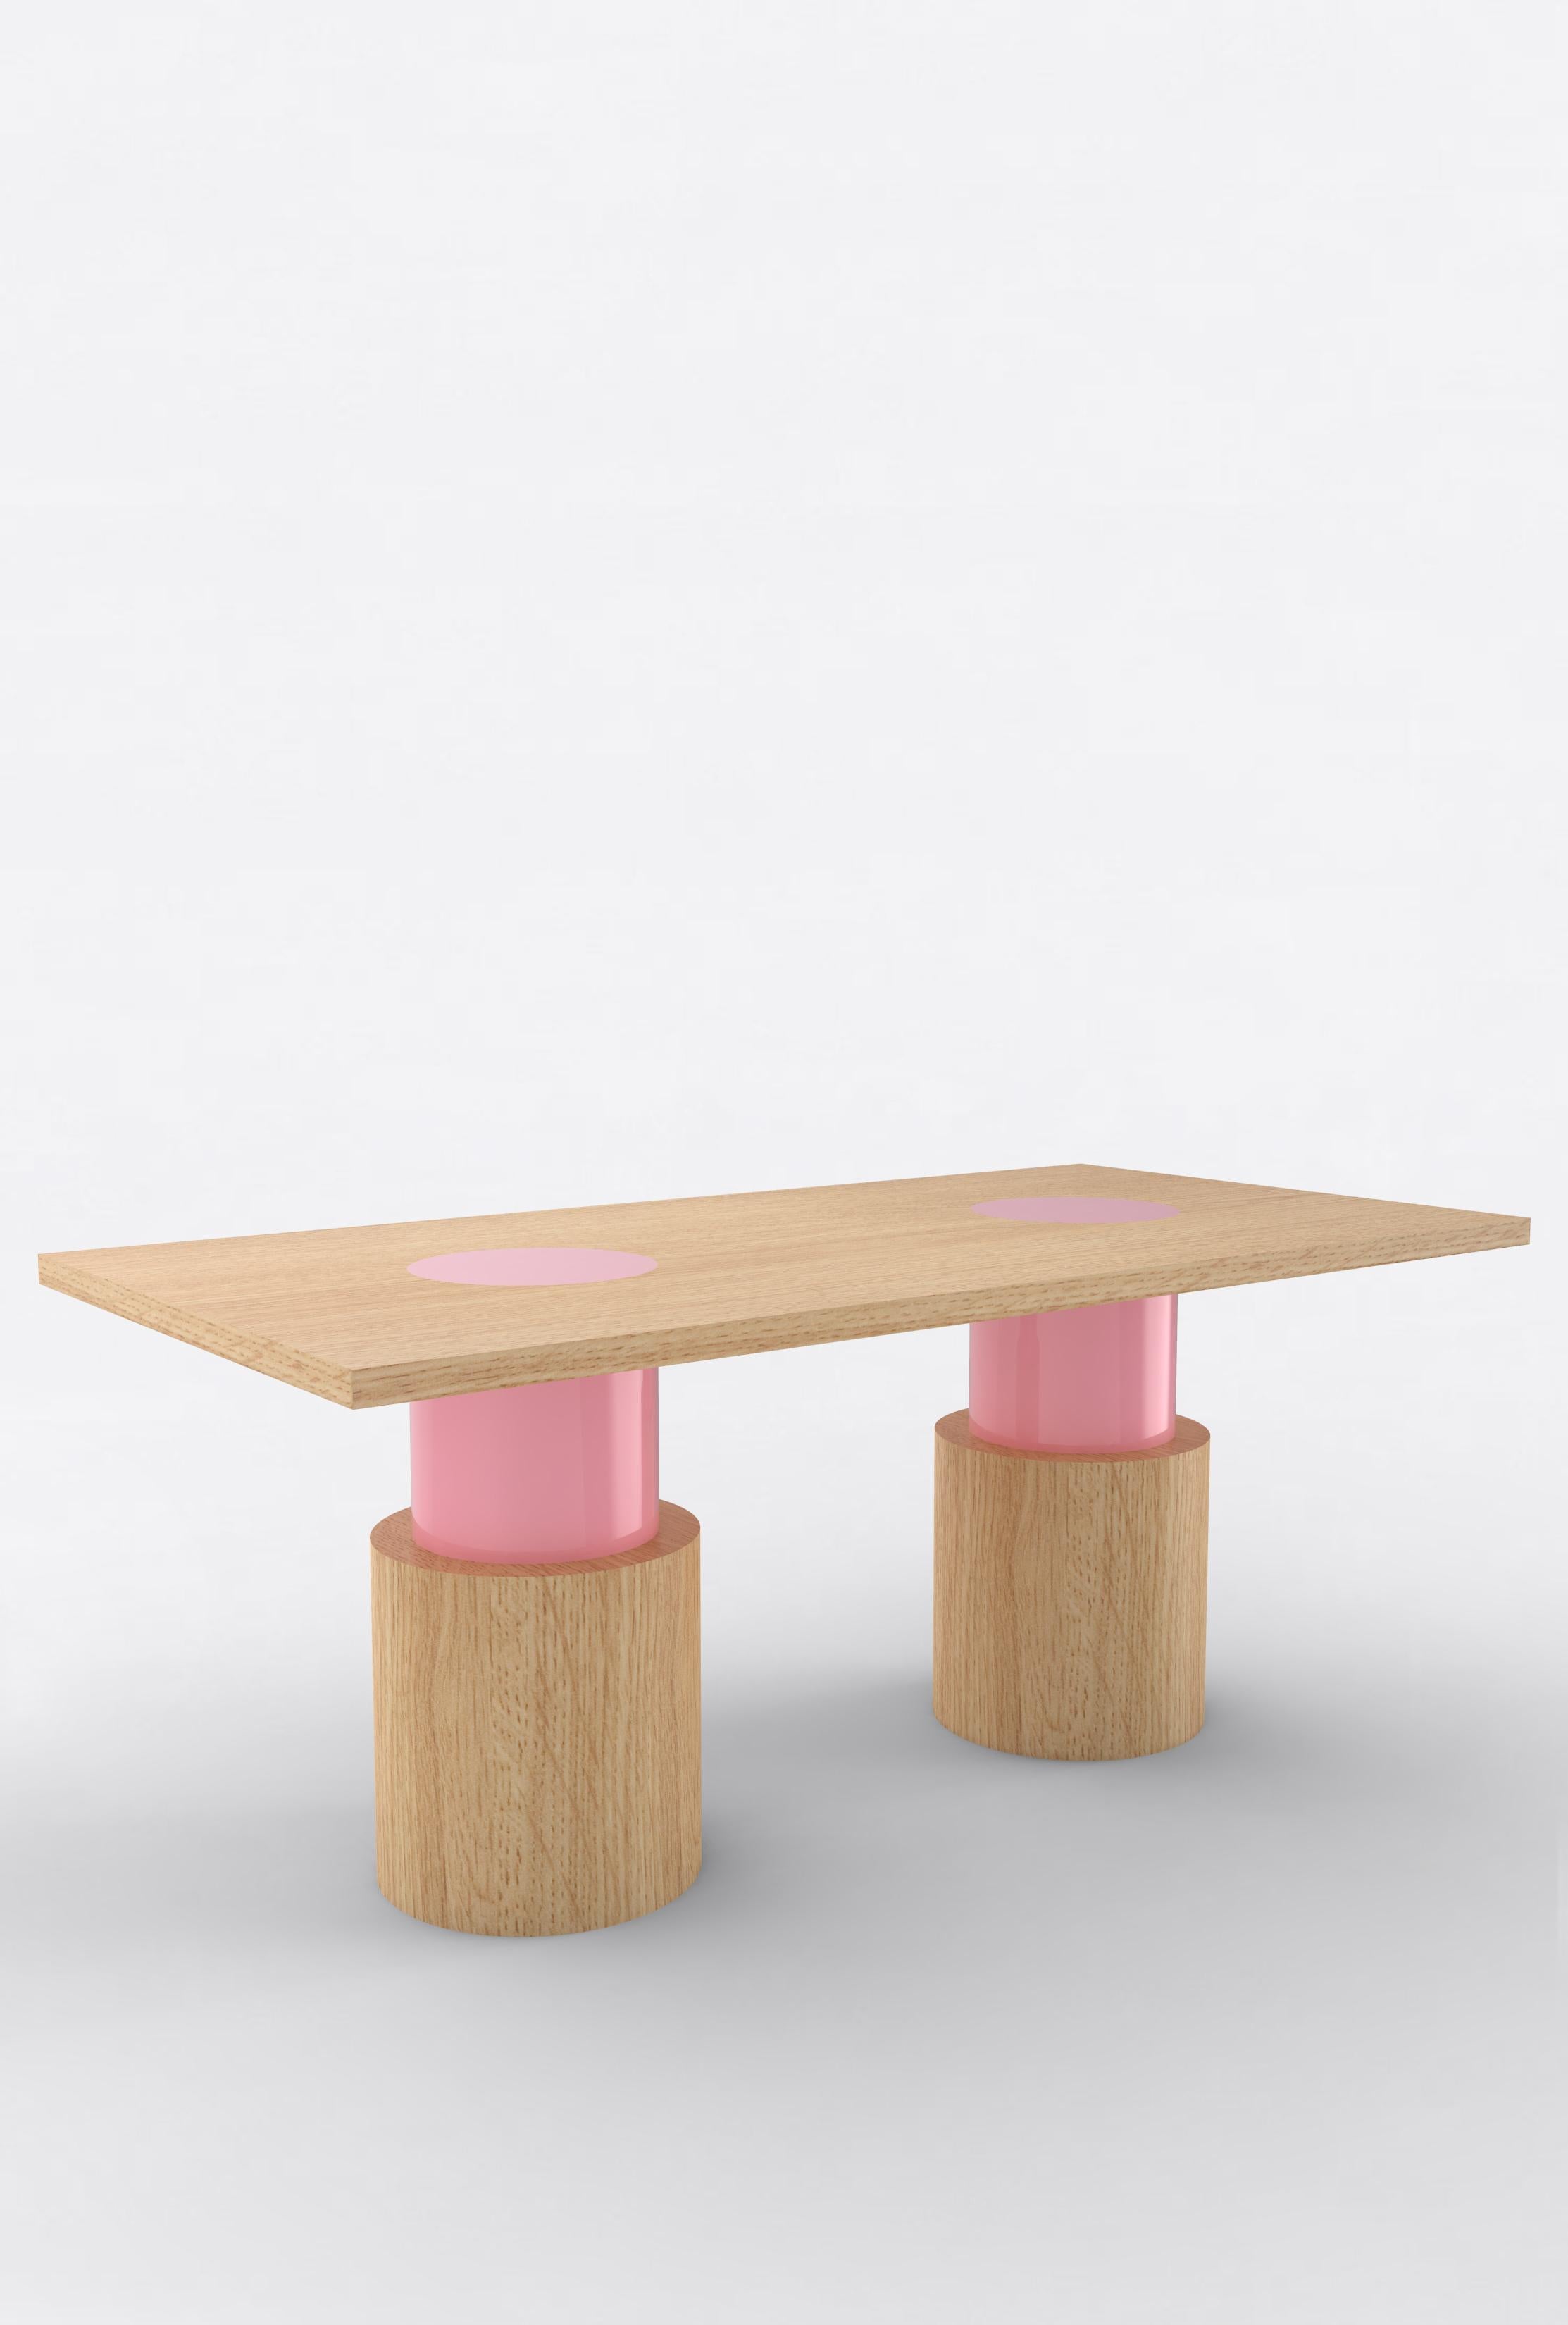 Orphan work 102C Dining Table, 2020
Shown in oak and color
Available in natural oak with painted base.
Colors available: pink, mint, yellow, blue and brown.
Measures: 108” L x 36” W x 30” H
Dimensions available:
72” L x 36” W x 30” H
84” L x 36” W x